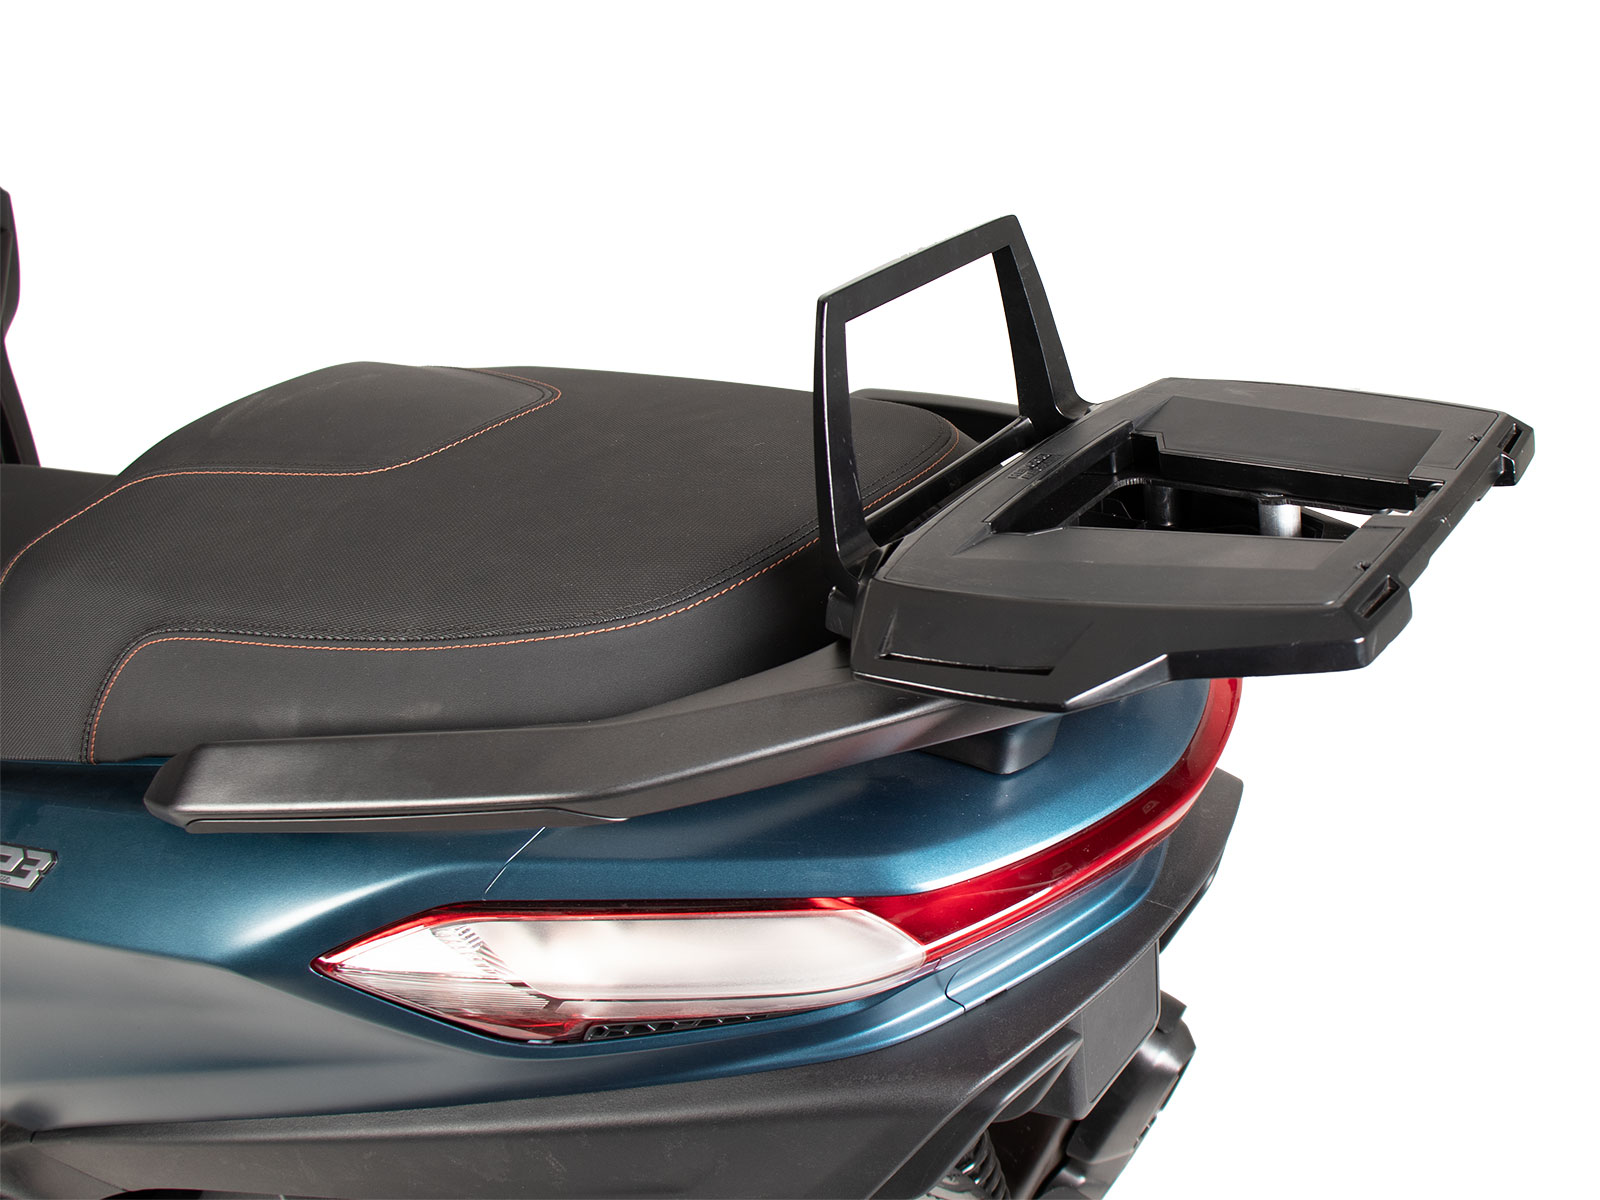 Alurack top case carrier black for combination with original rear rack for Piaggio MP3 400 / Sport 400